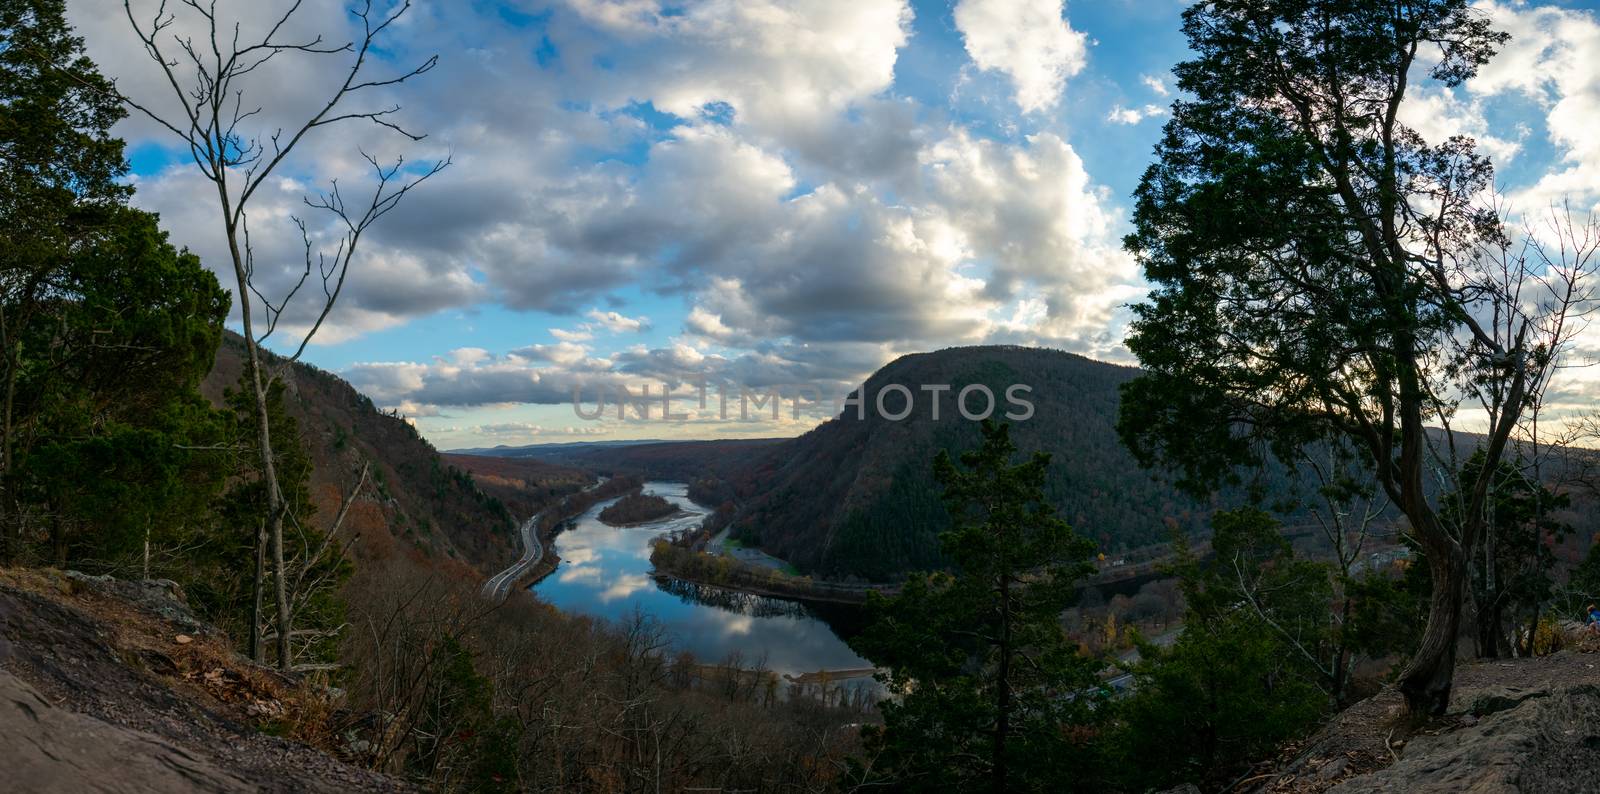 A Panoramic Shot of the View From Mount Tammany at the Delaware Water Gap During Autumn